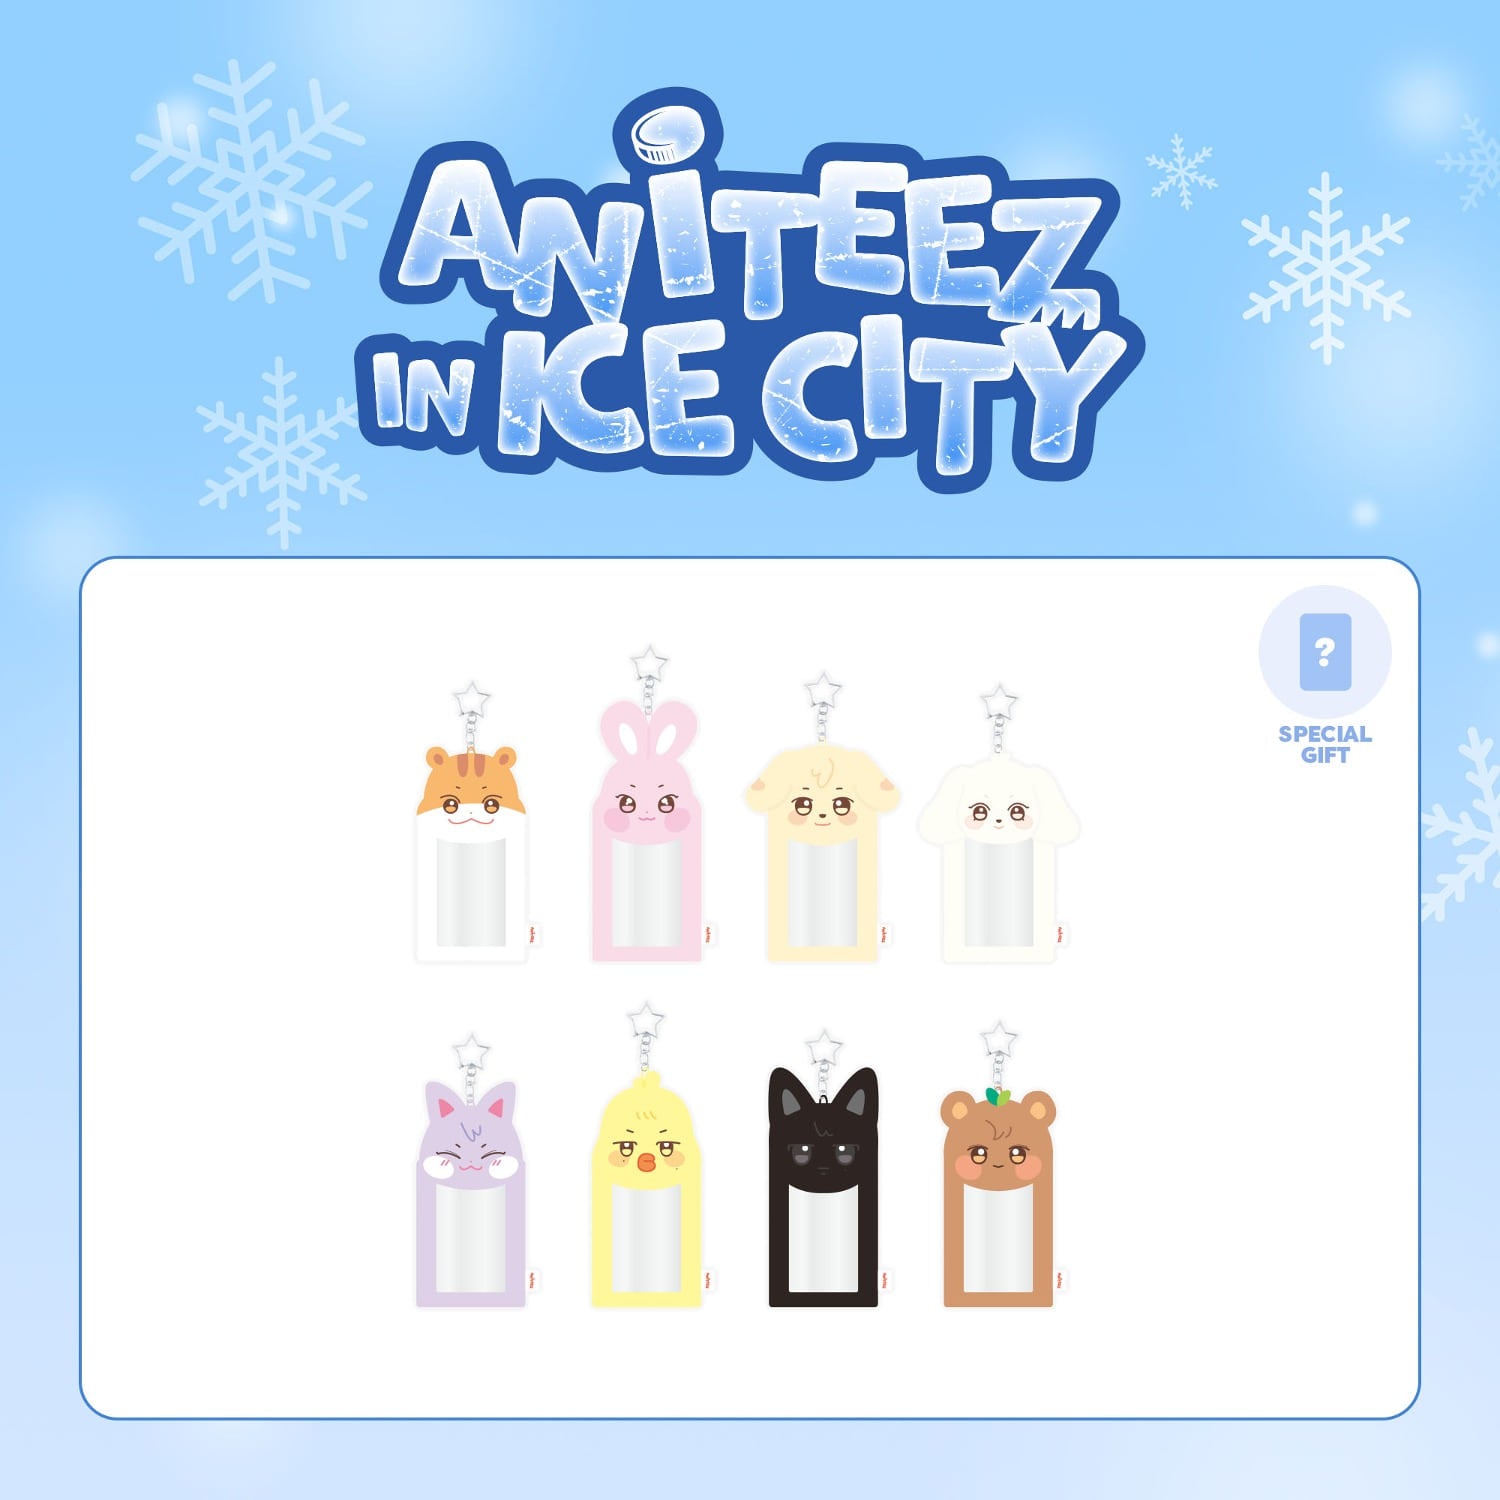 ATEEZ - ATEEZ X ANITEEZ IN ICE CITY OFFICIAL MD PLUSH PHOTOCARD HOLDER KEYRING